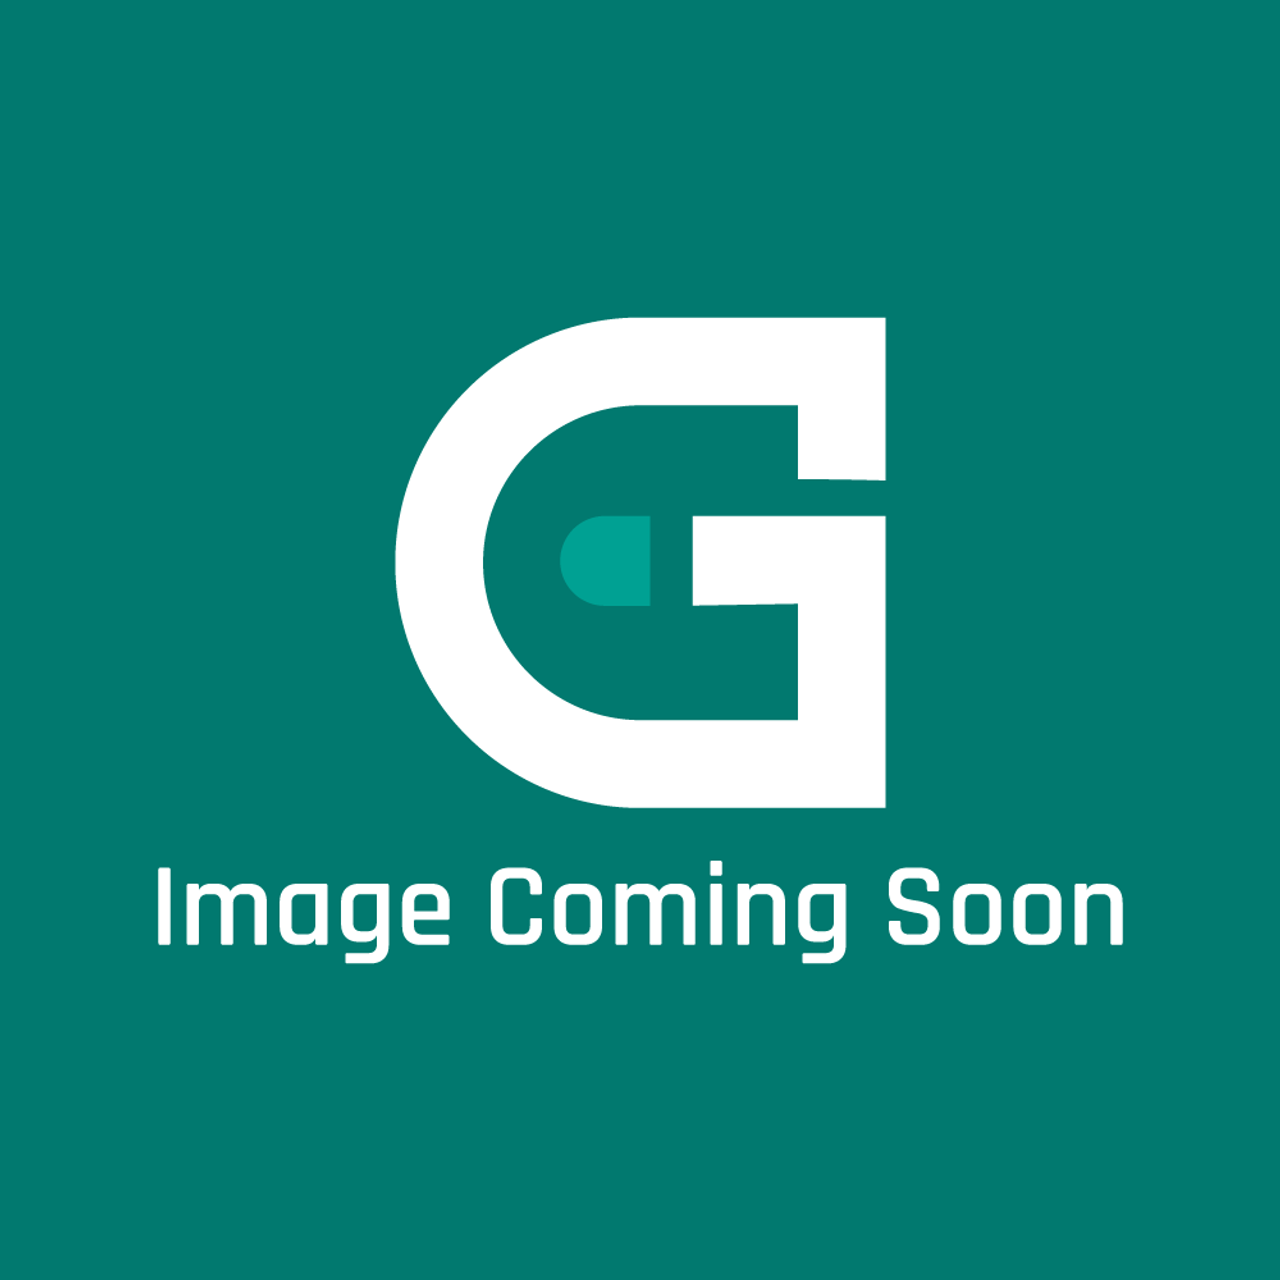 Frigidaire - Electrolux 137371700 Panel - Image Coming Soon!